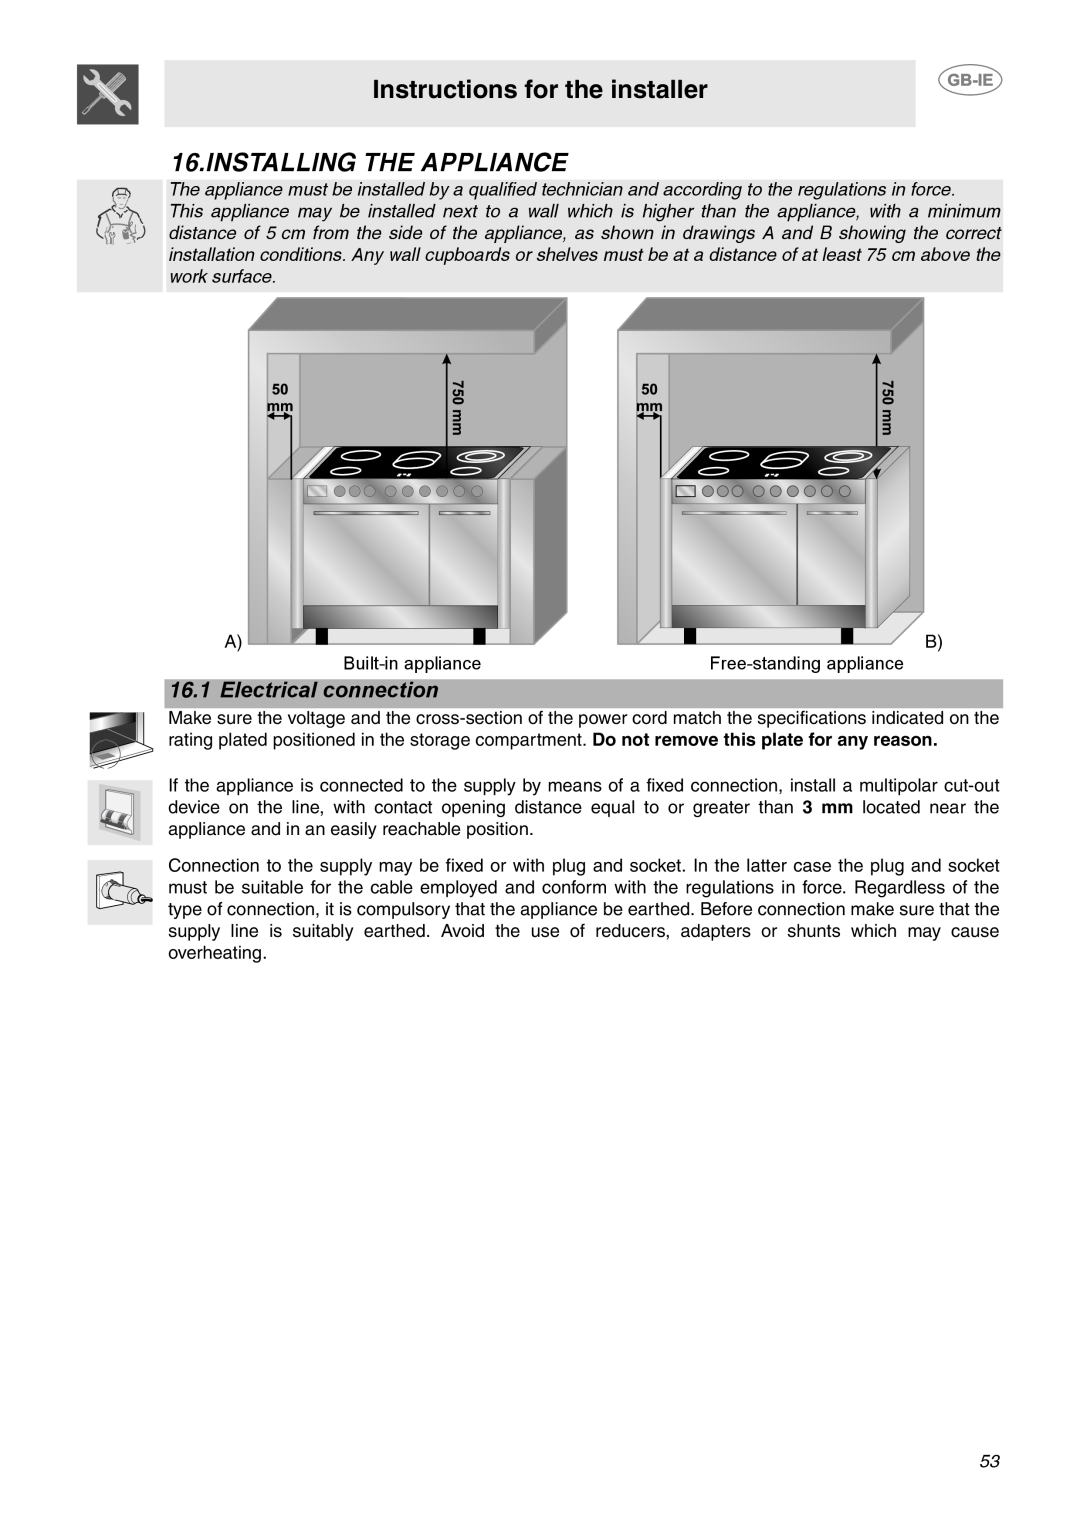 Smeg CE92CMX manual Instructions for the installer, Installing The Appliance, 16.1Electrical connection 